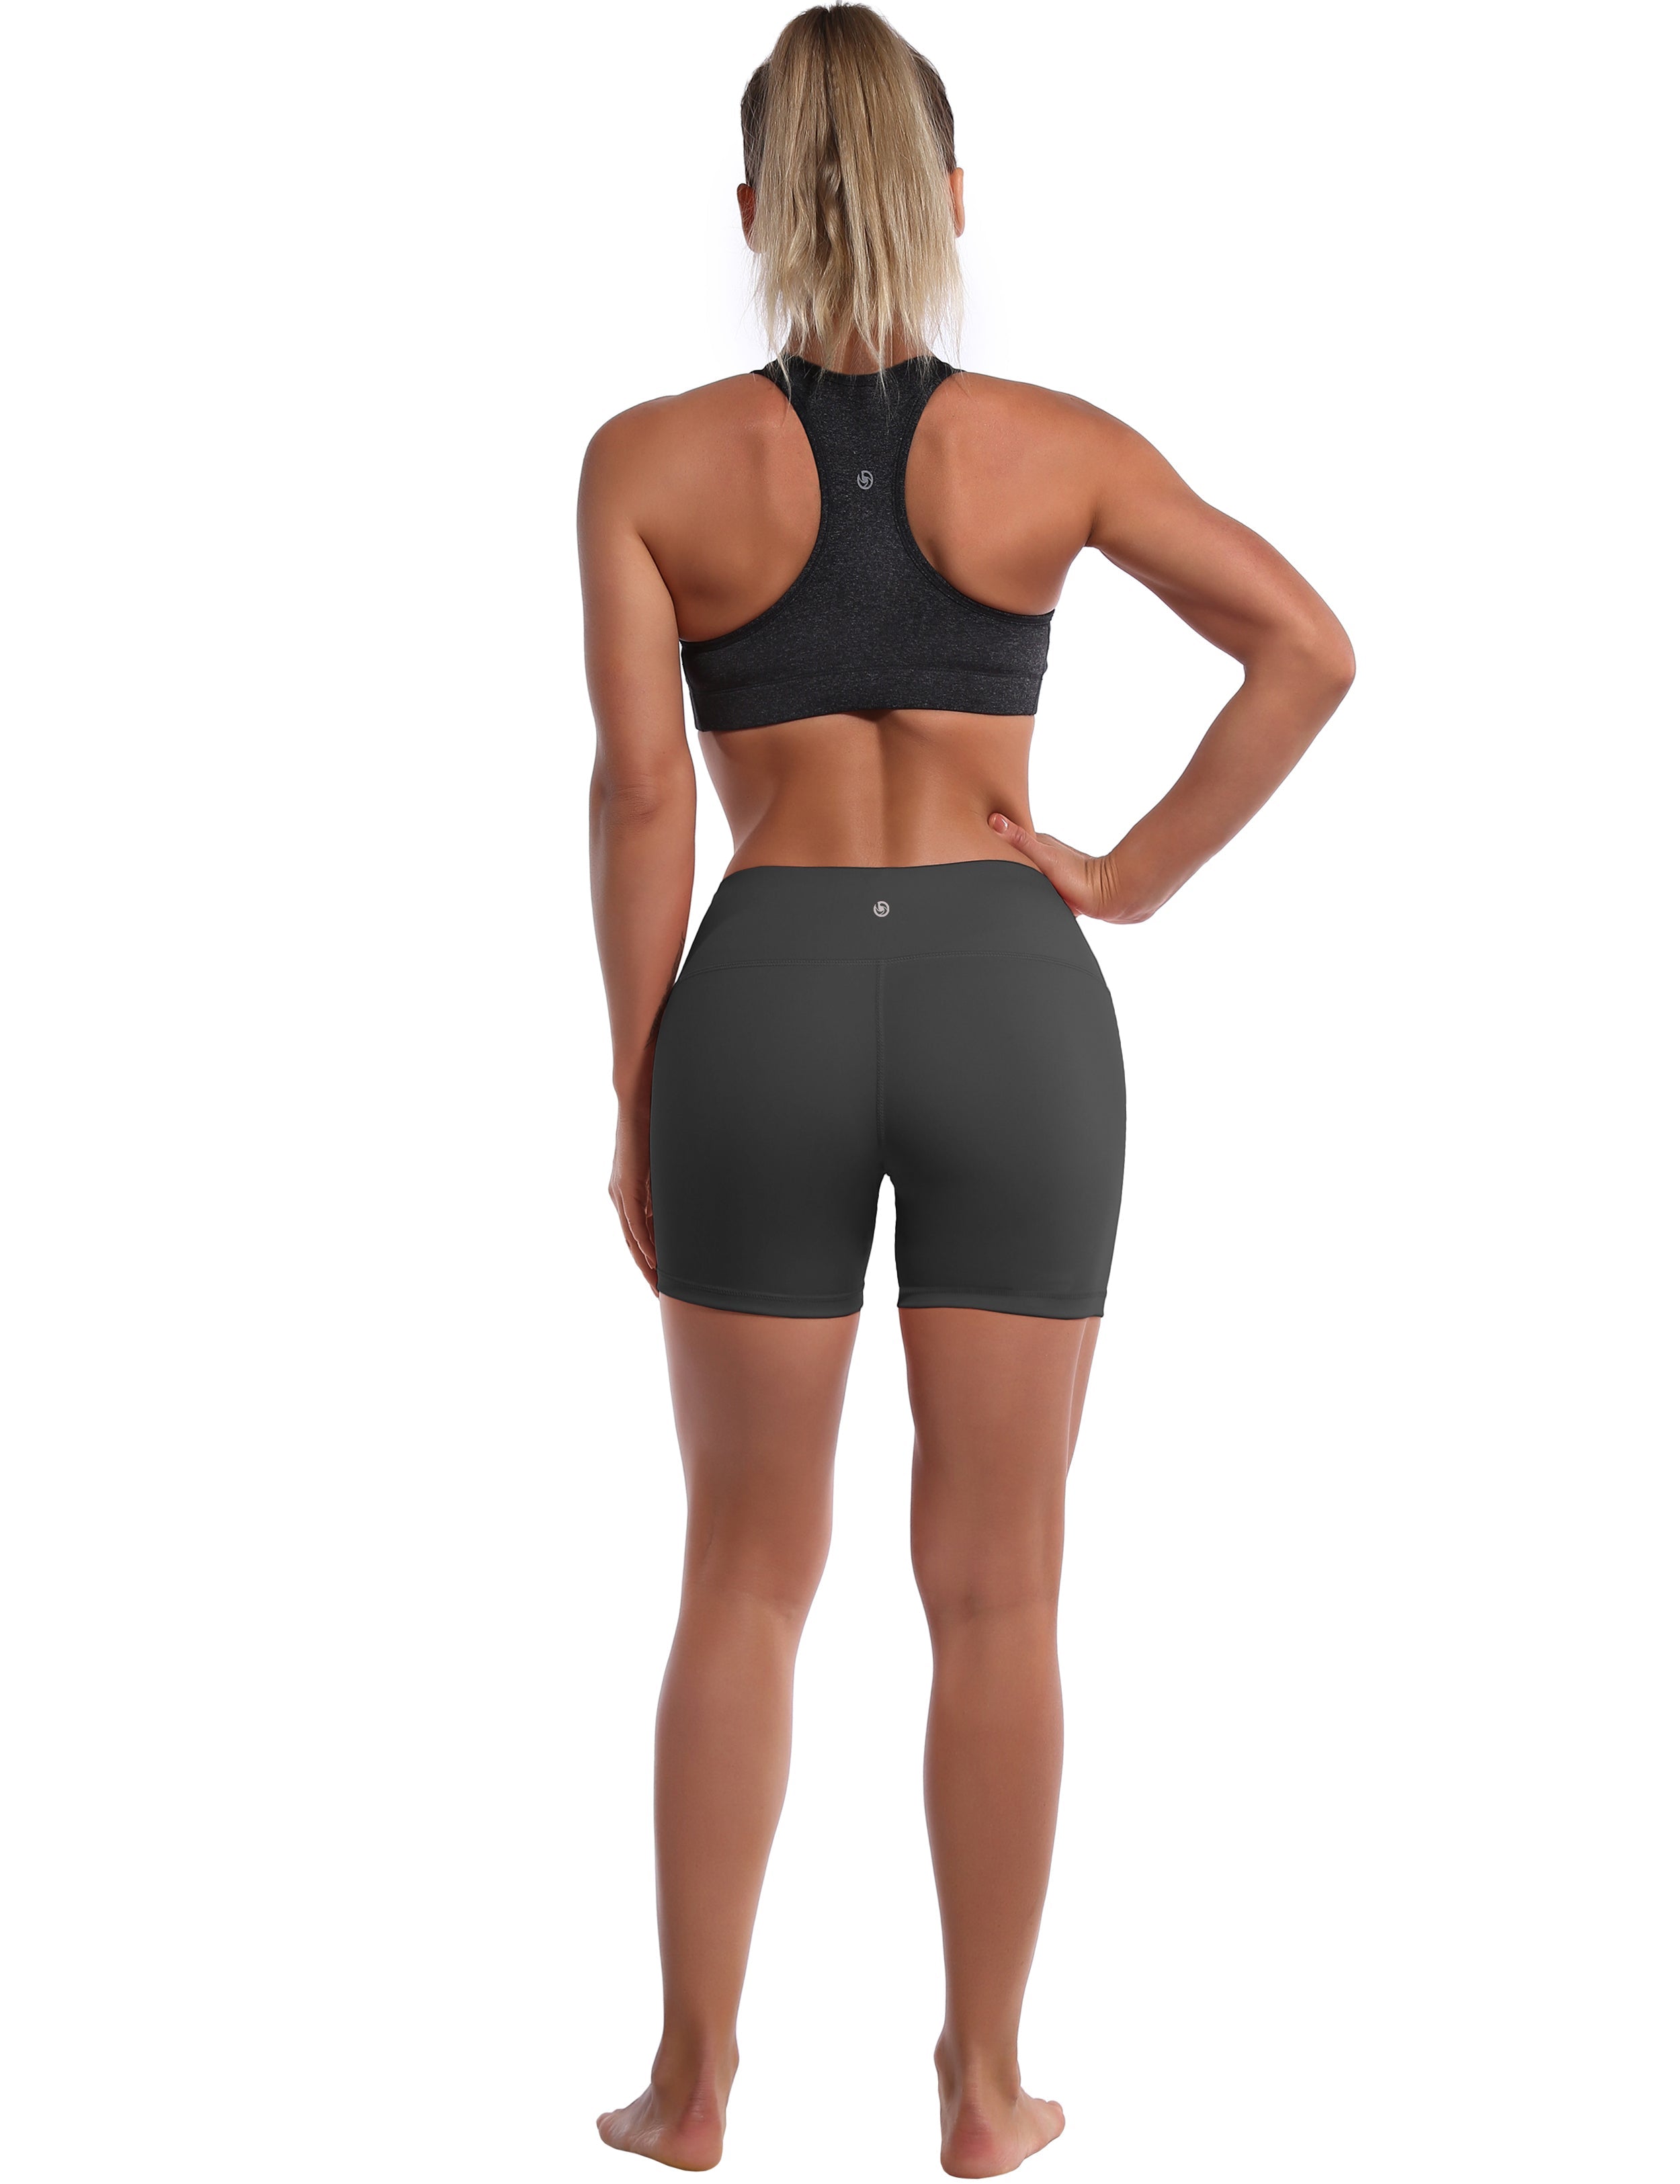 4" Pilates Shorts shadowcharcoal Sleek, soft, smooth and totally comfortable: our newest style is here. Softest-ever fabric High elasticity High density 4-way stretch Fabric doesn't attract lint easily No see-through Moisture-wicking Machine wash 75% Nylon, 25% Spandex